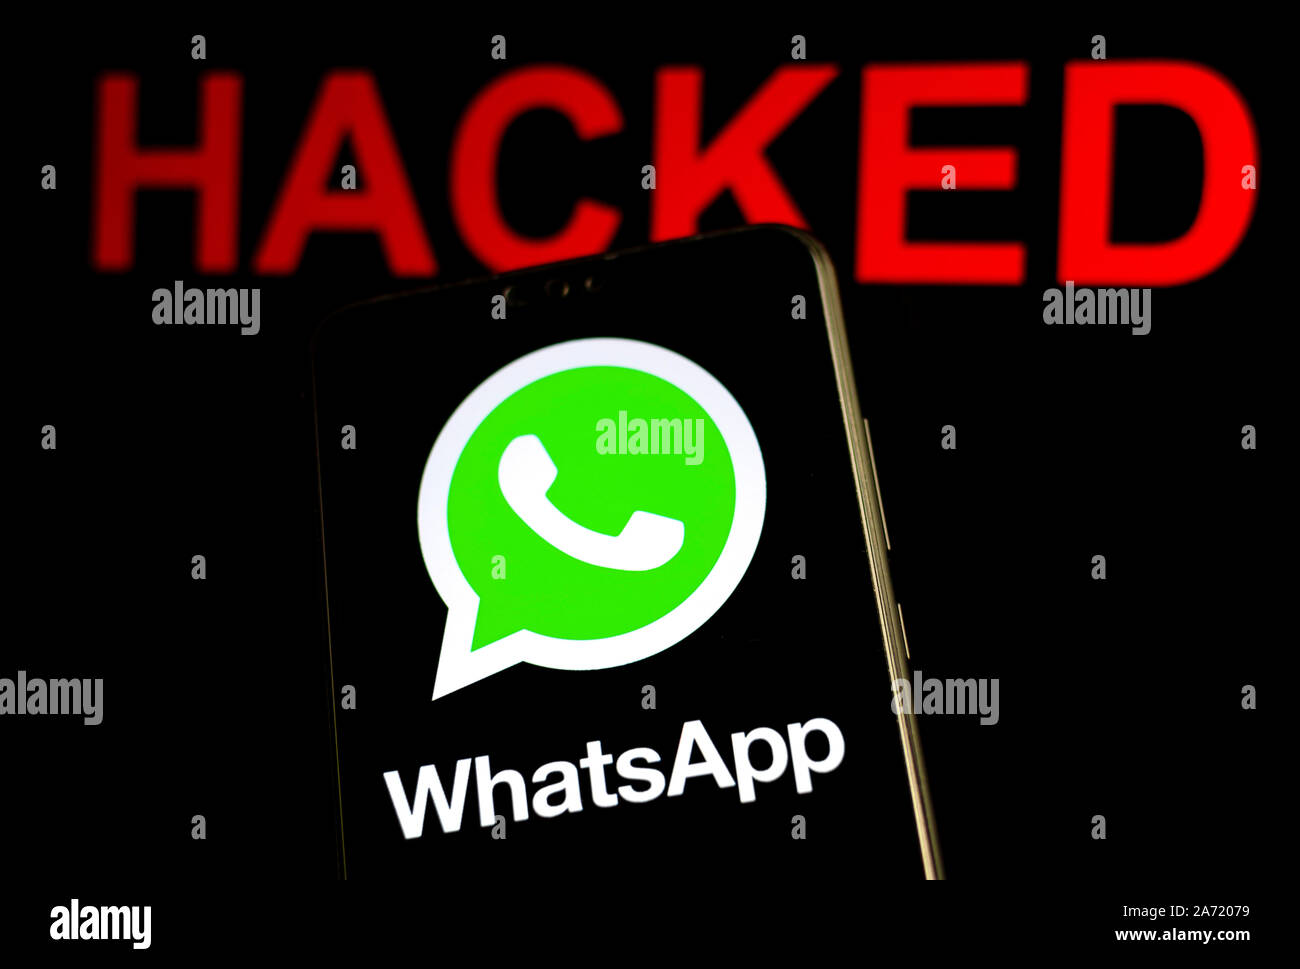 WhatsApp logo on the smartphone screen in a dark room and the word 'Hacked' at the blurred background. Selective focus. Stock Photo